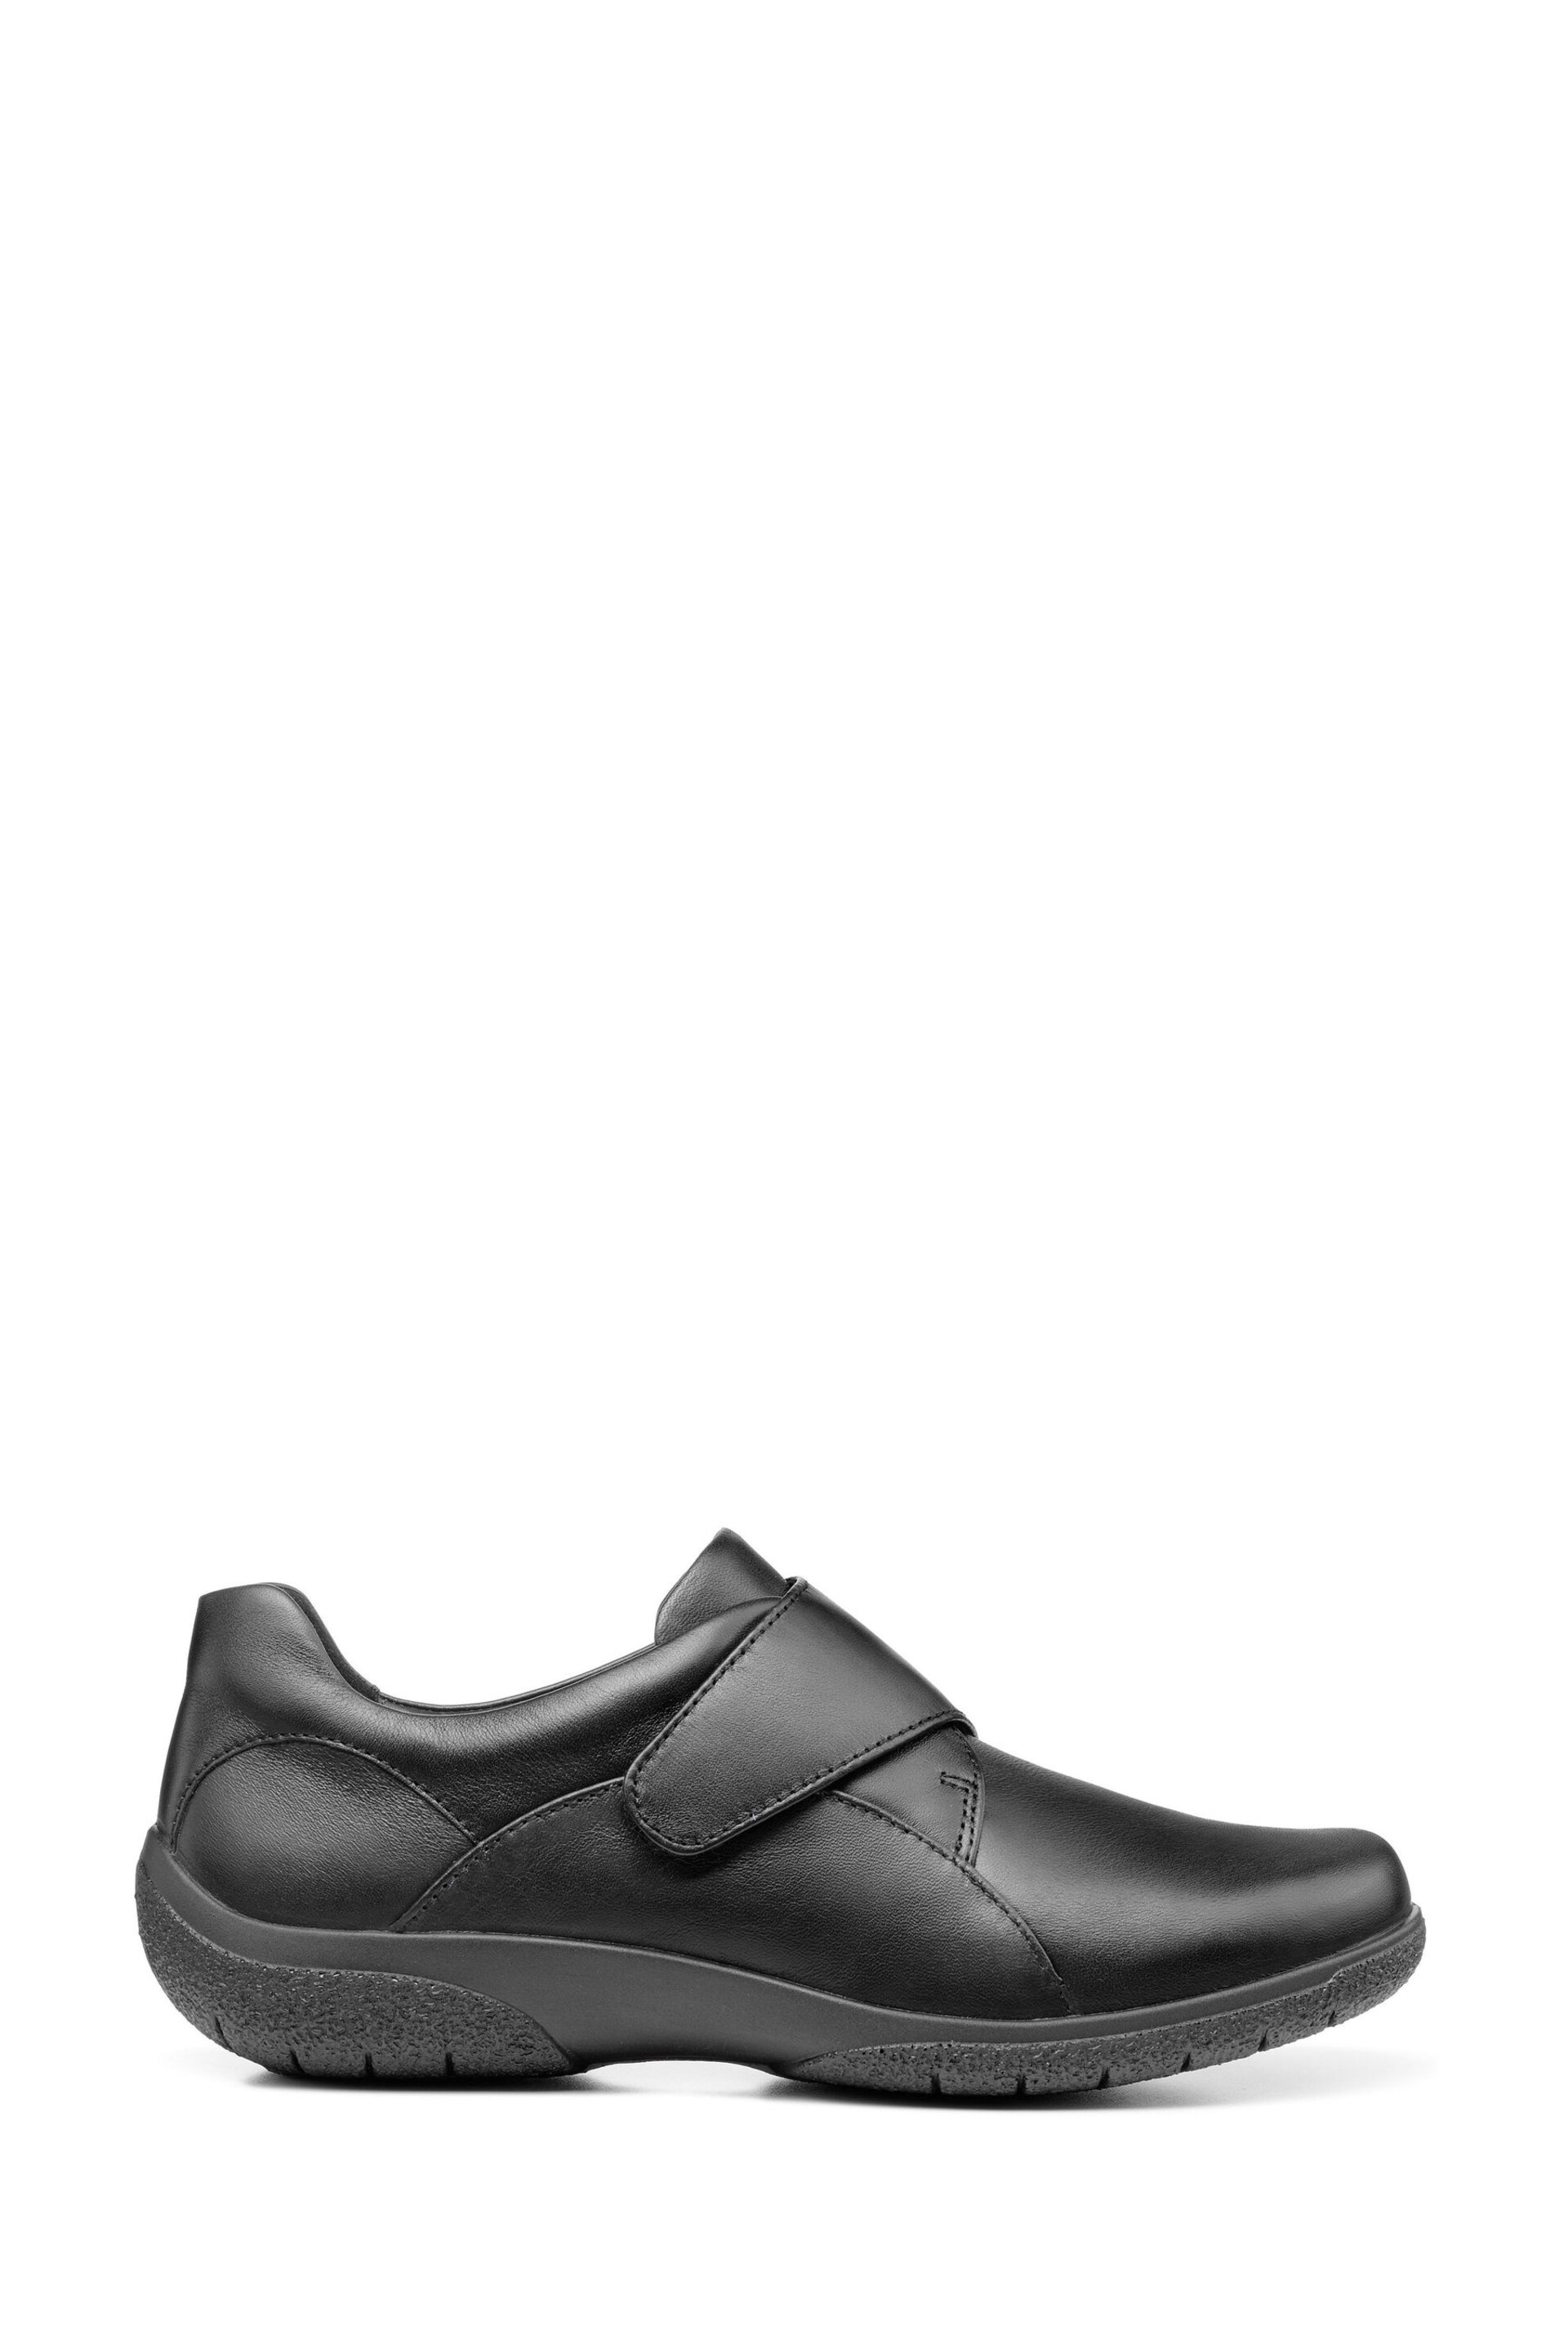 Hotter Sugar II Wide Fit Touch Fastening Black Shoes - Image 1 of 4